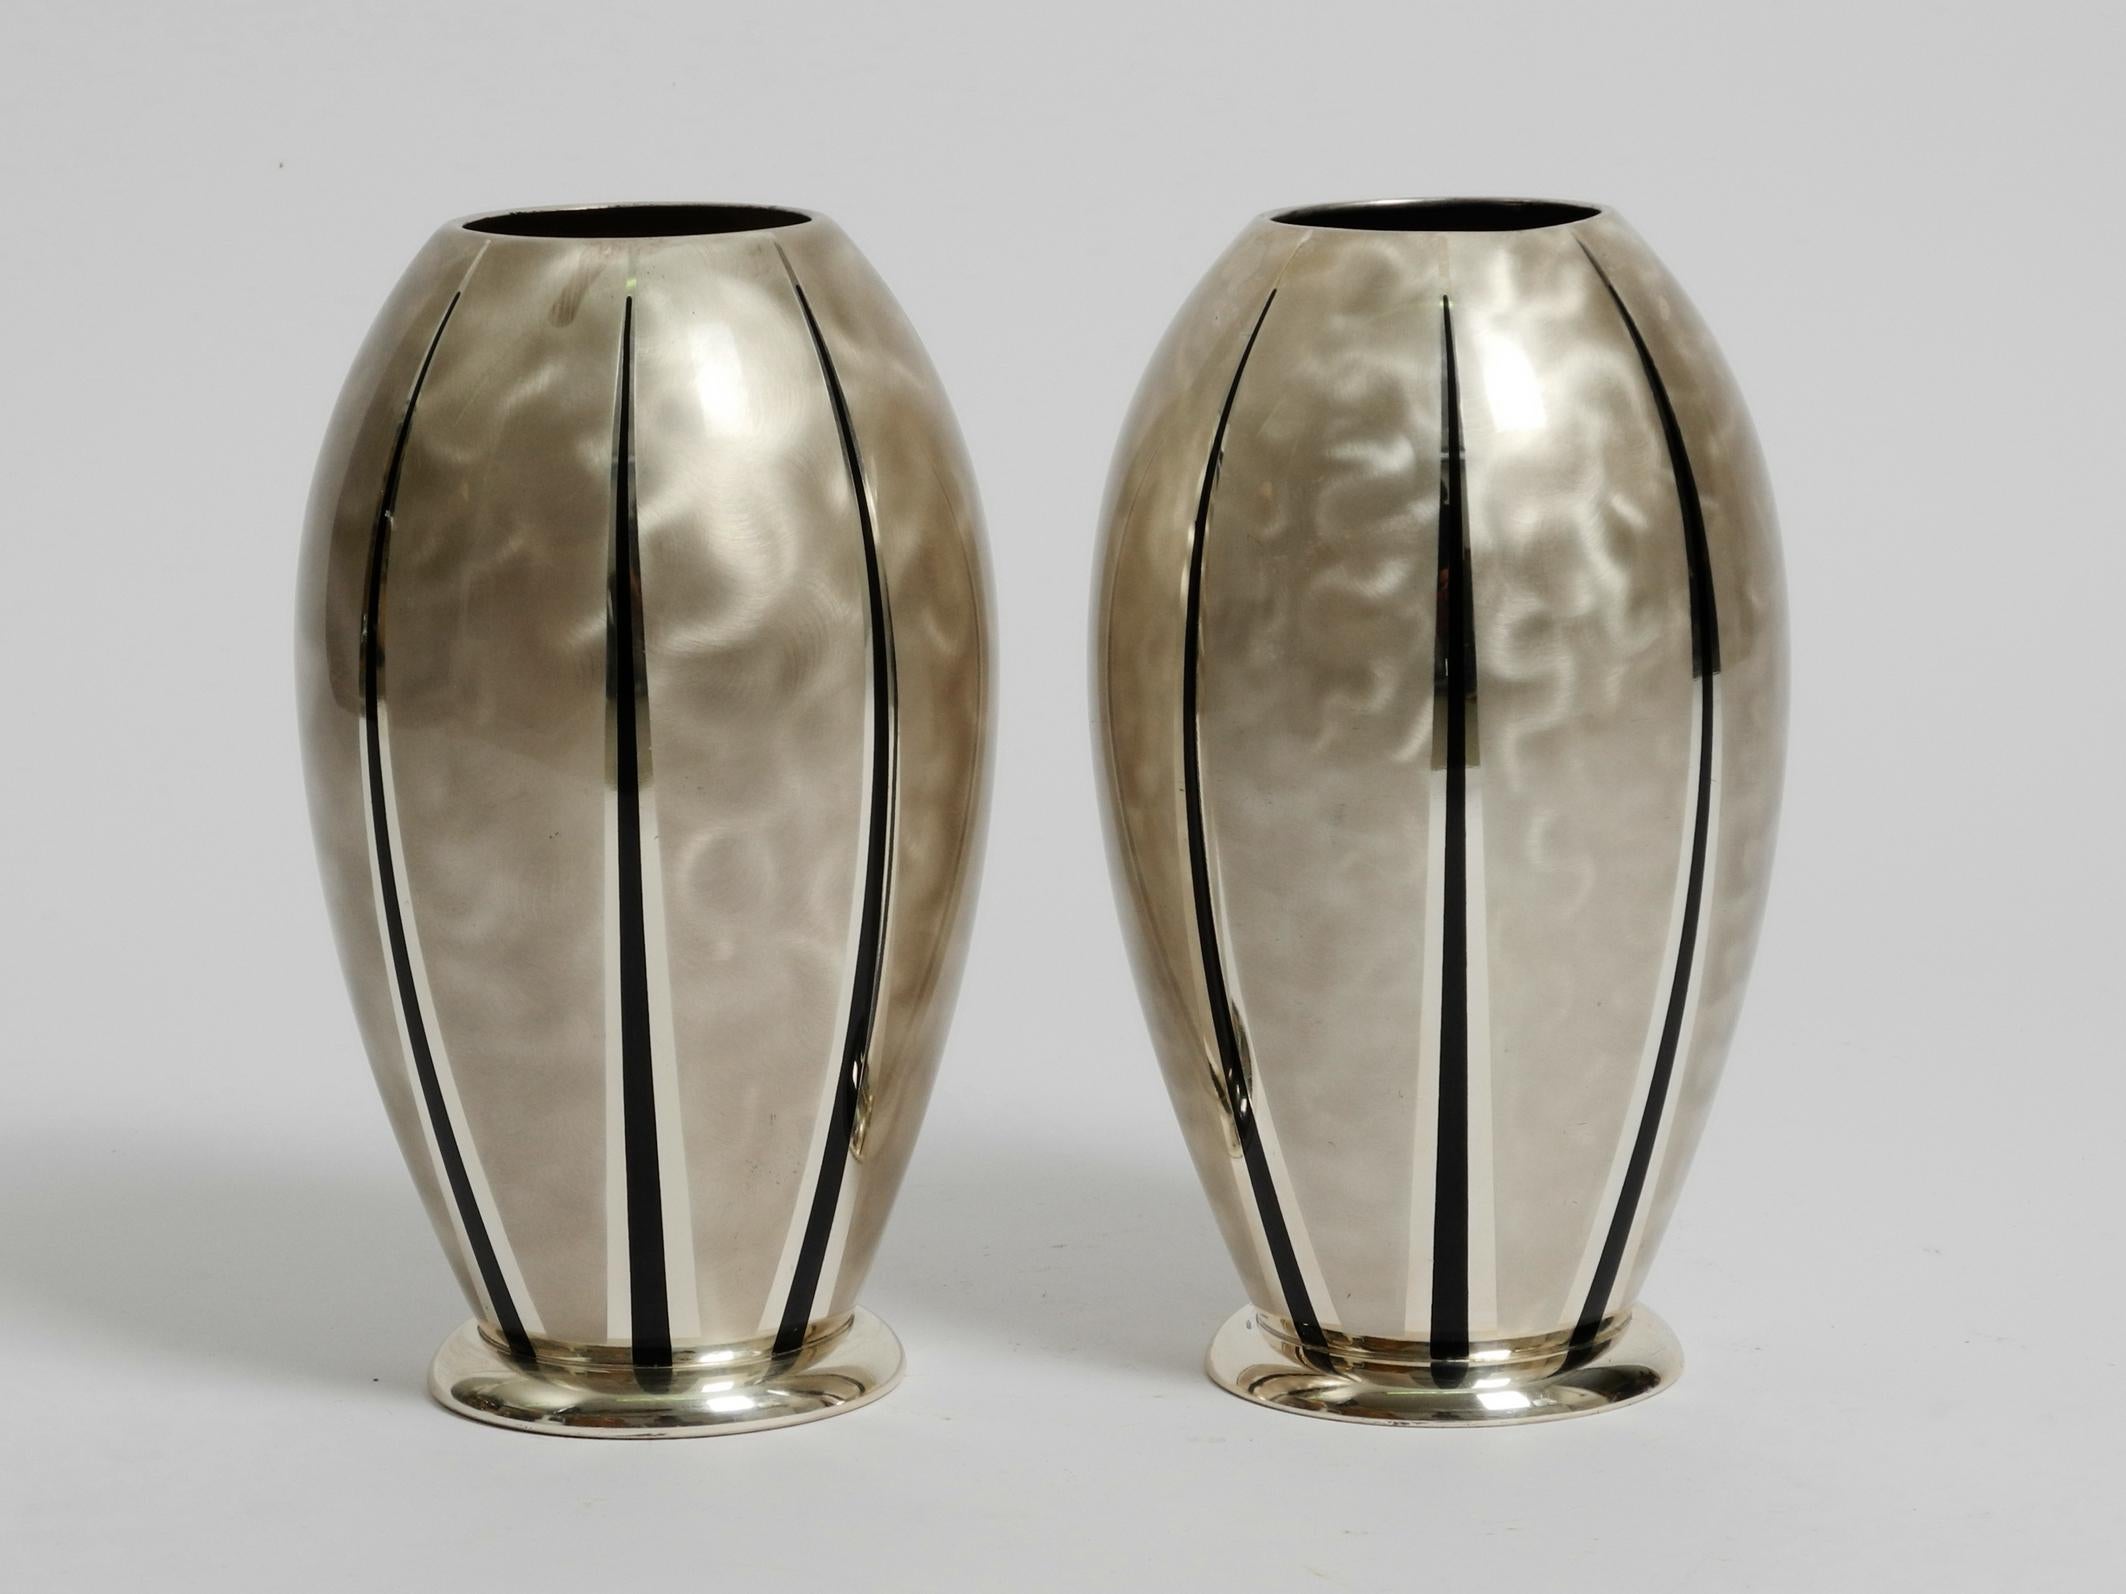 Pair of Mid Century Modern WMF Ikora table vases made of silver-plated brass For Sale 10